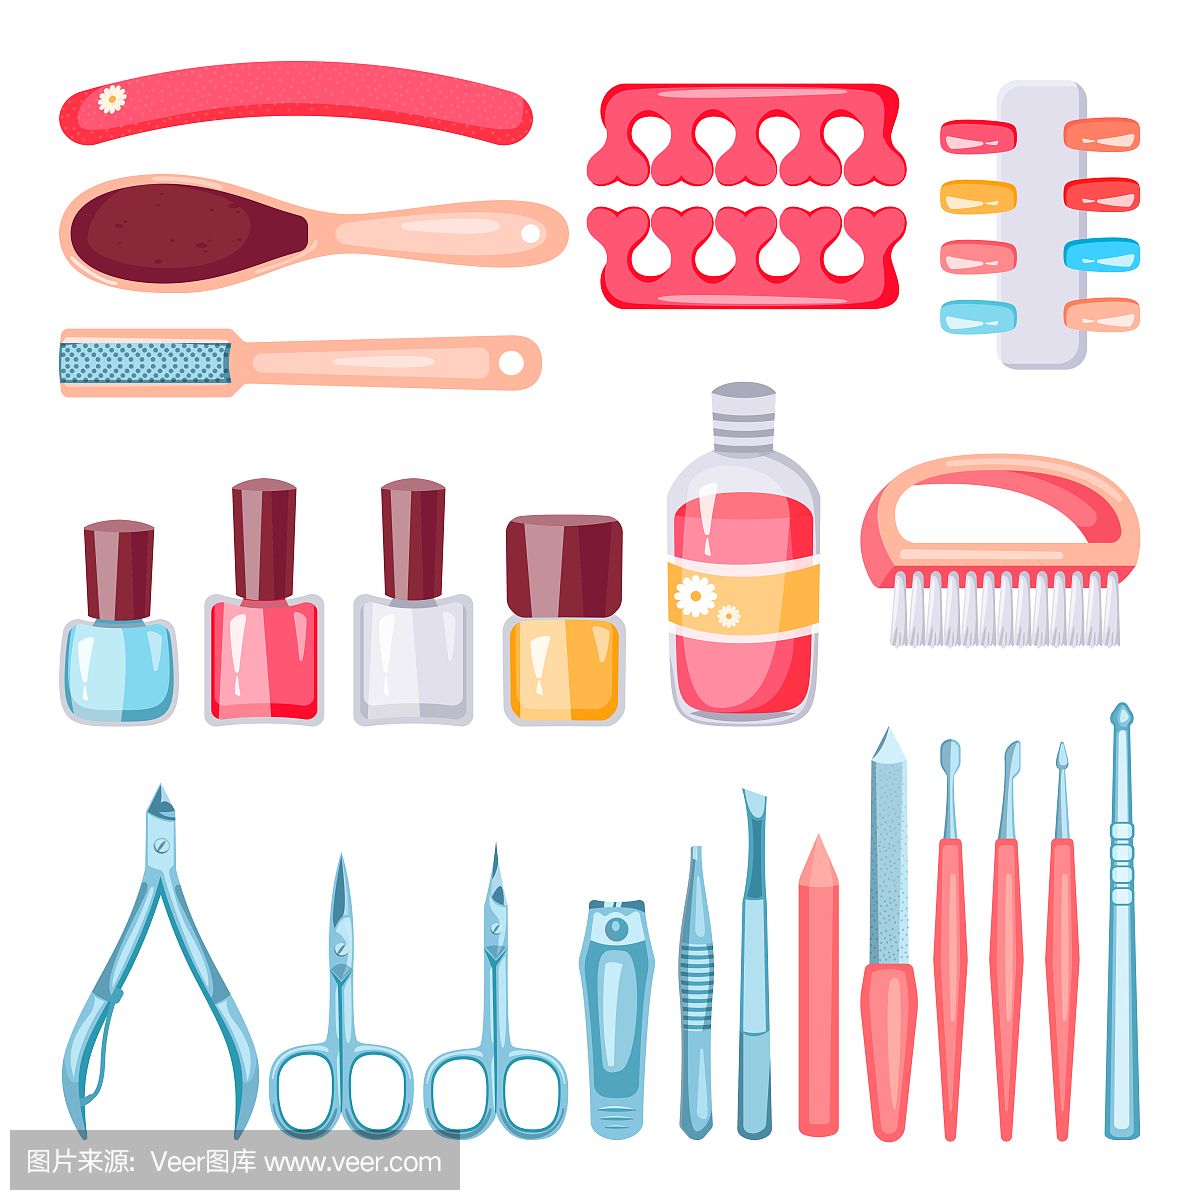 Manicure, pedicure tools and cosmetics set. Vector cartoon illustration. Nails, hands and feet care products